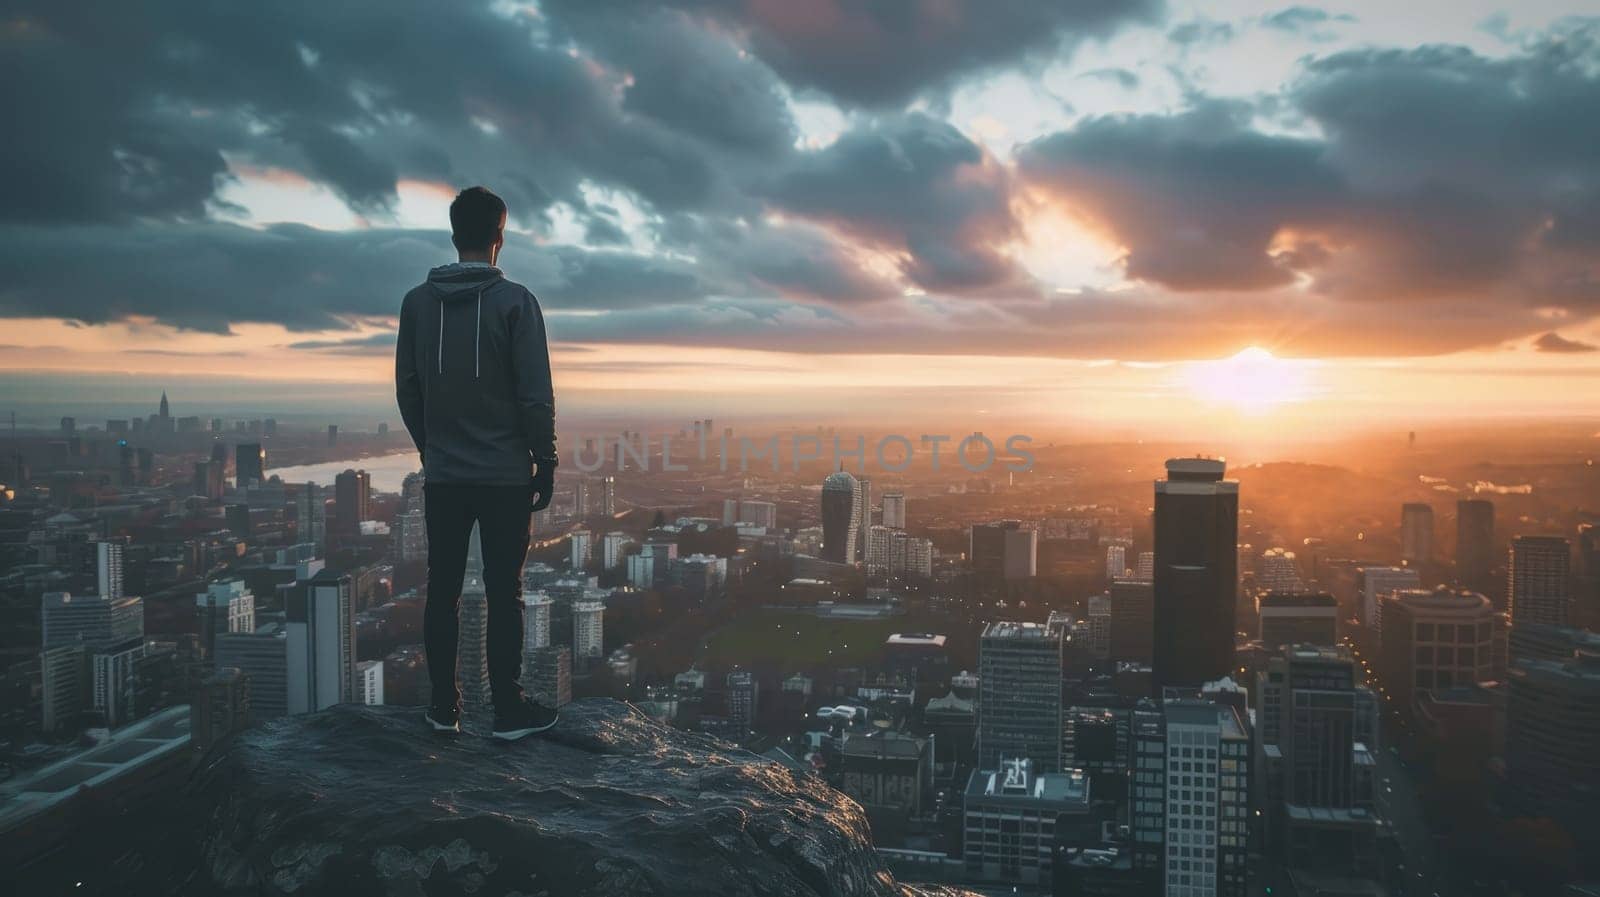 A man stands on a ledge overlooking a city at sunset. The sky is cloudy and the sun is setting, casting a warm glow over the city. The man is lost in thought, taking in the beauty of the scene